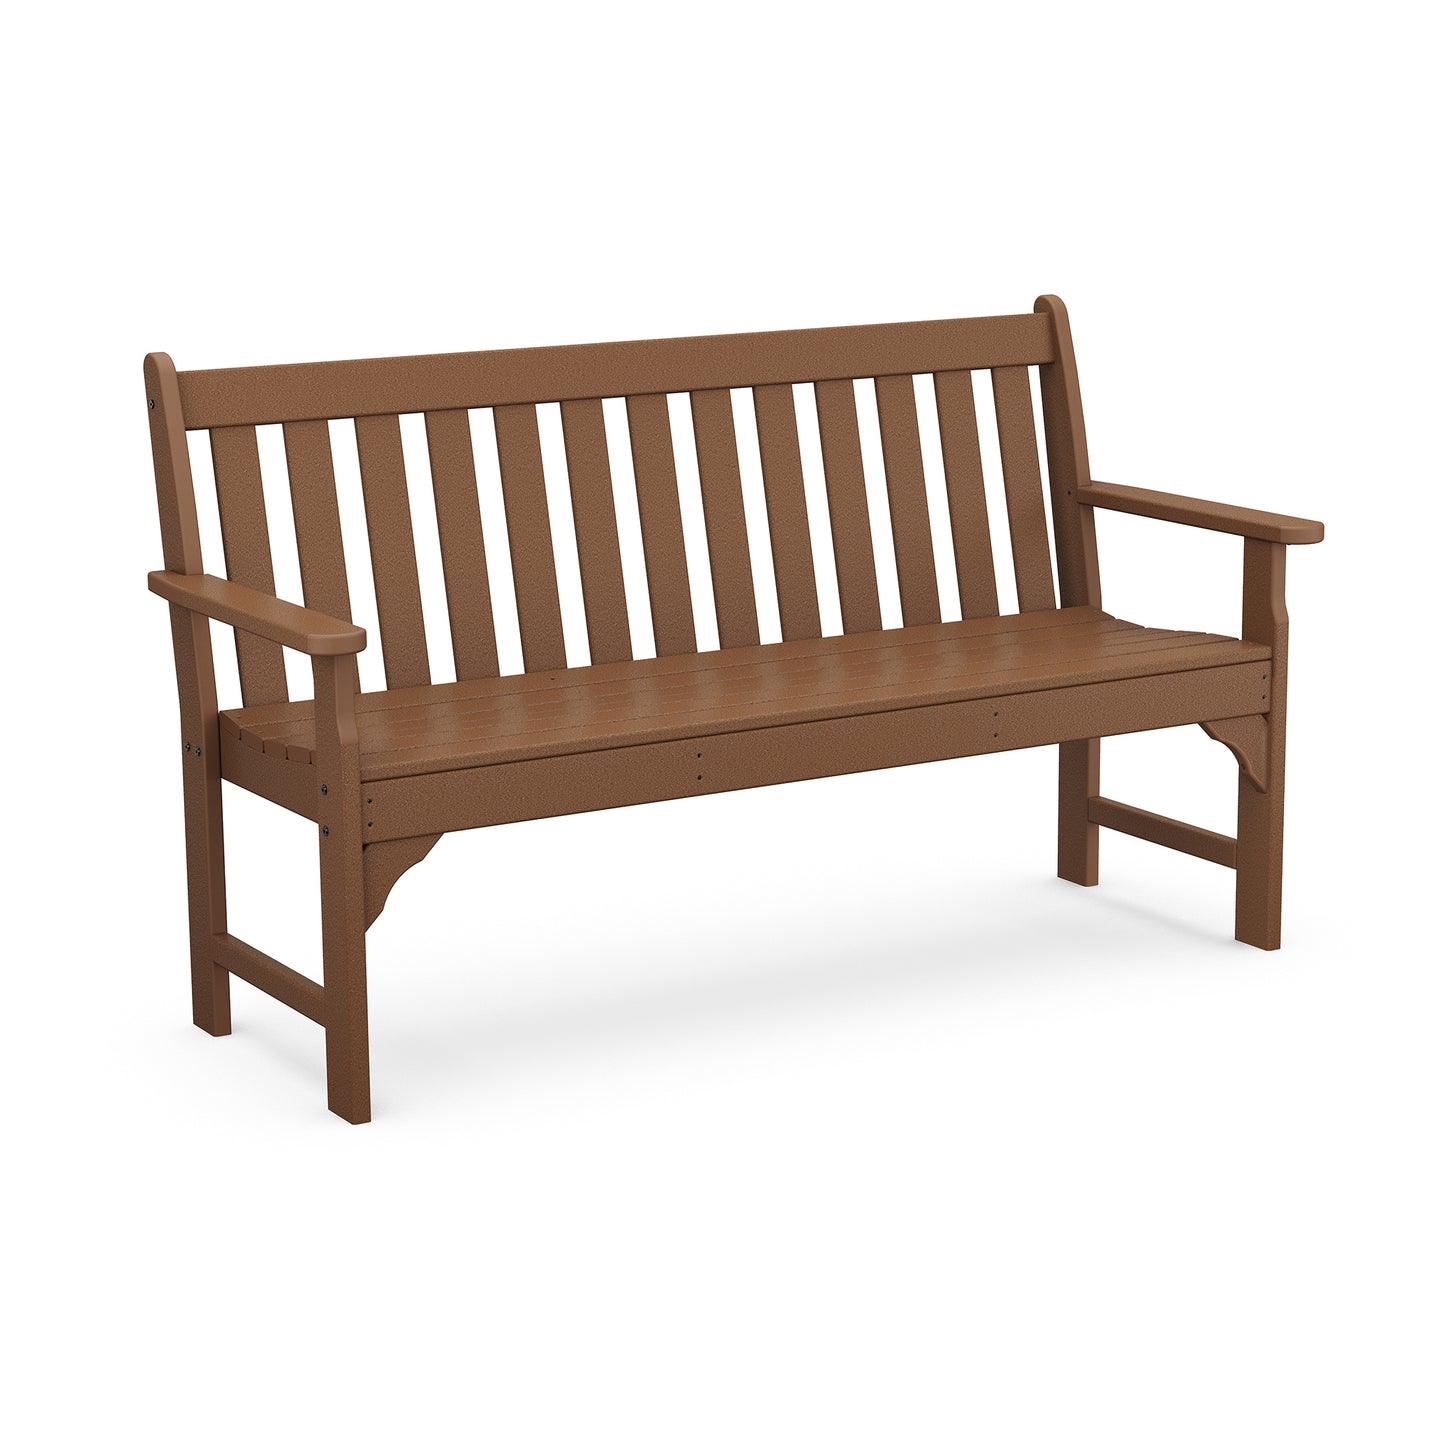 A traditional POLYWOOD® Vineyard 60" Garden Bench with armrests, featuring a slatted back and seat, displayed on a white background.